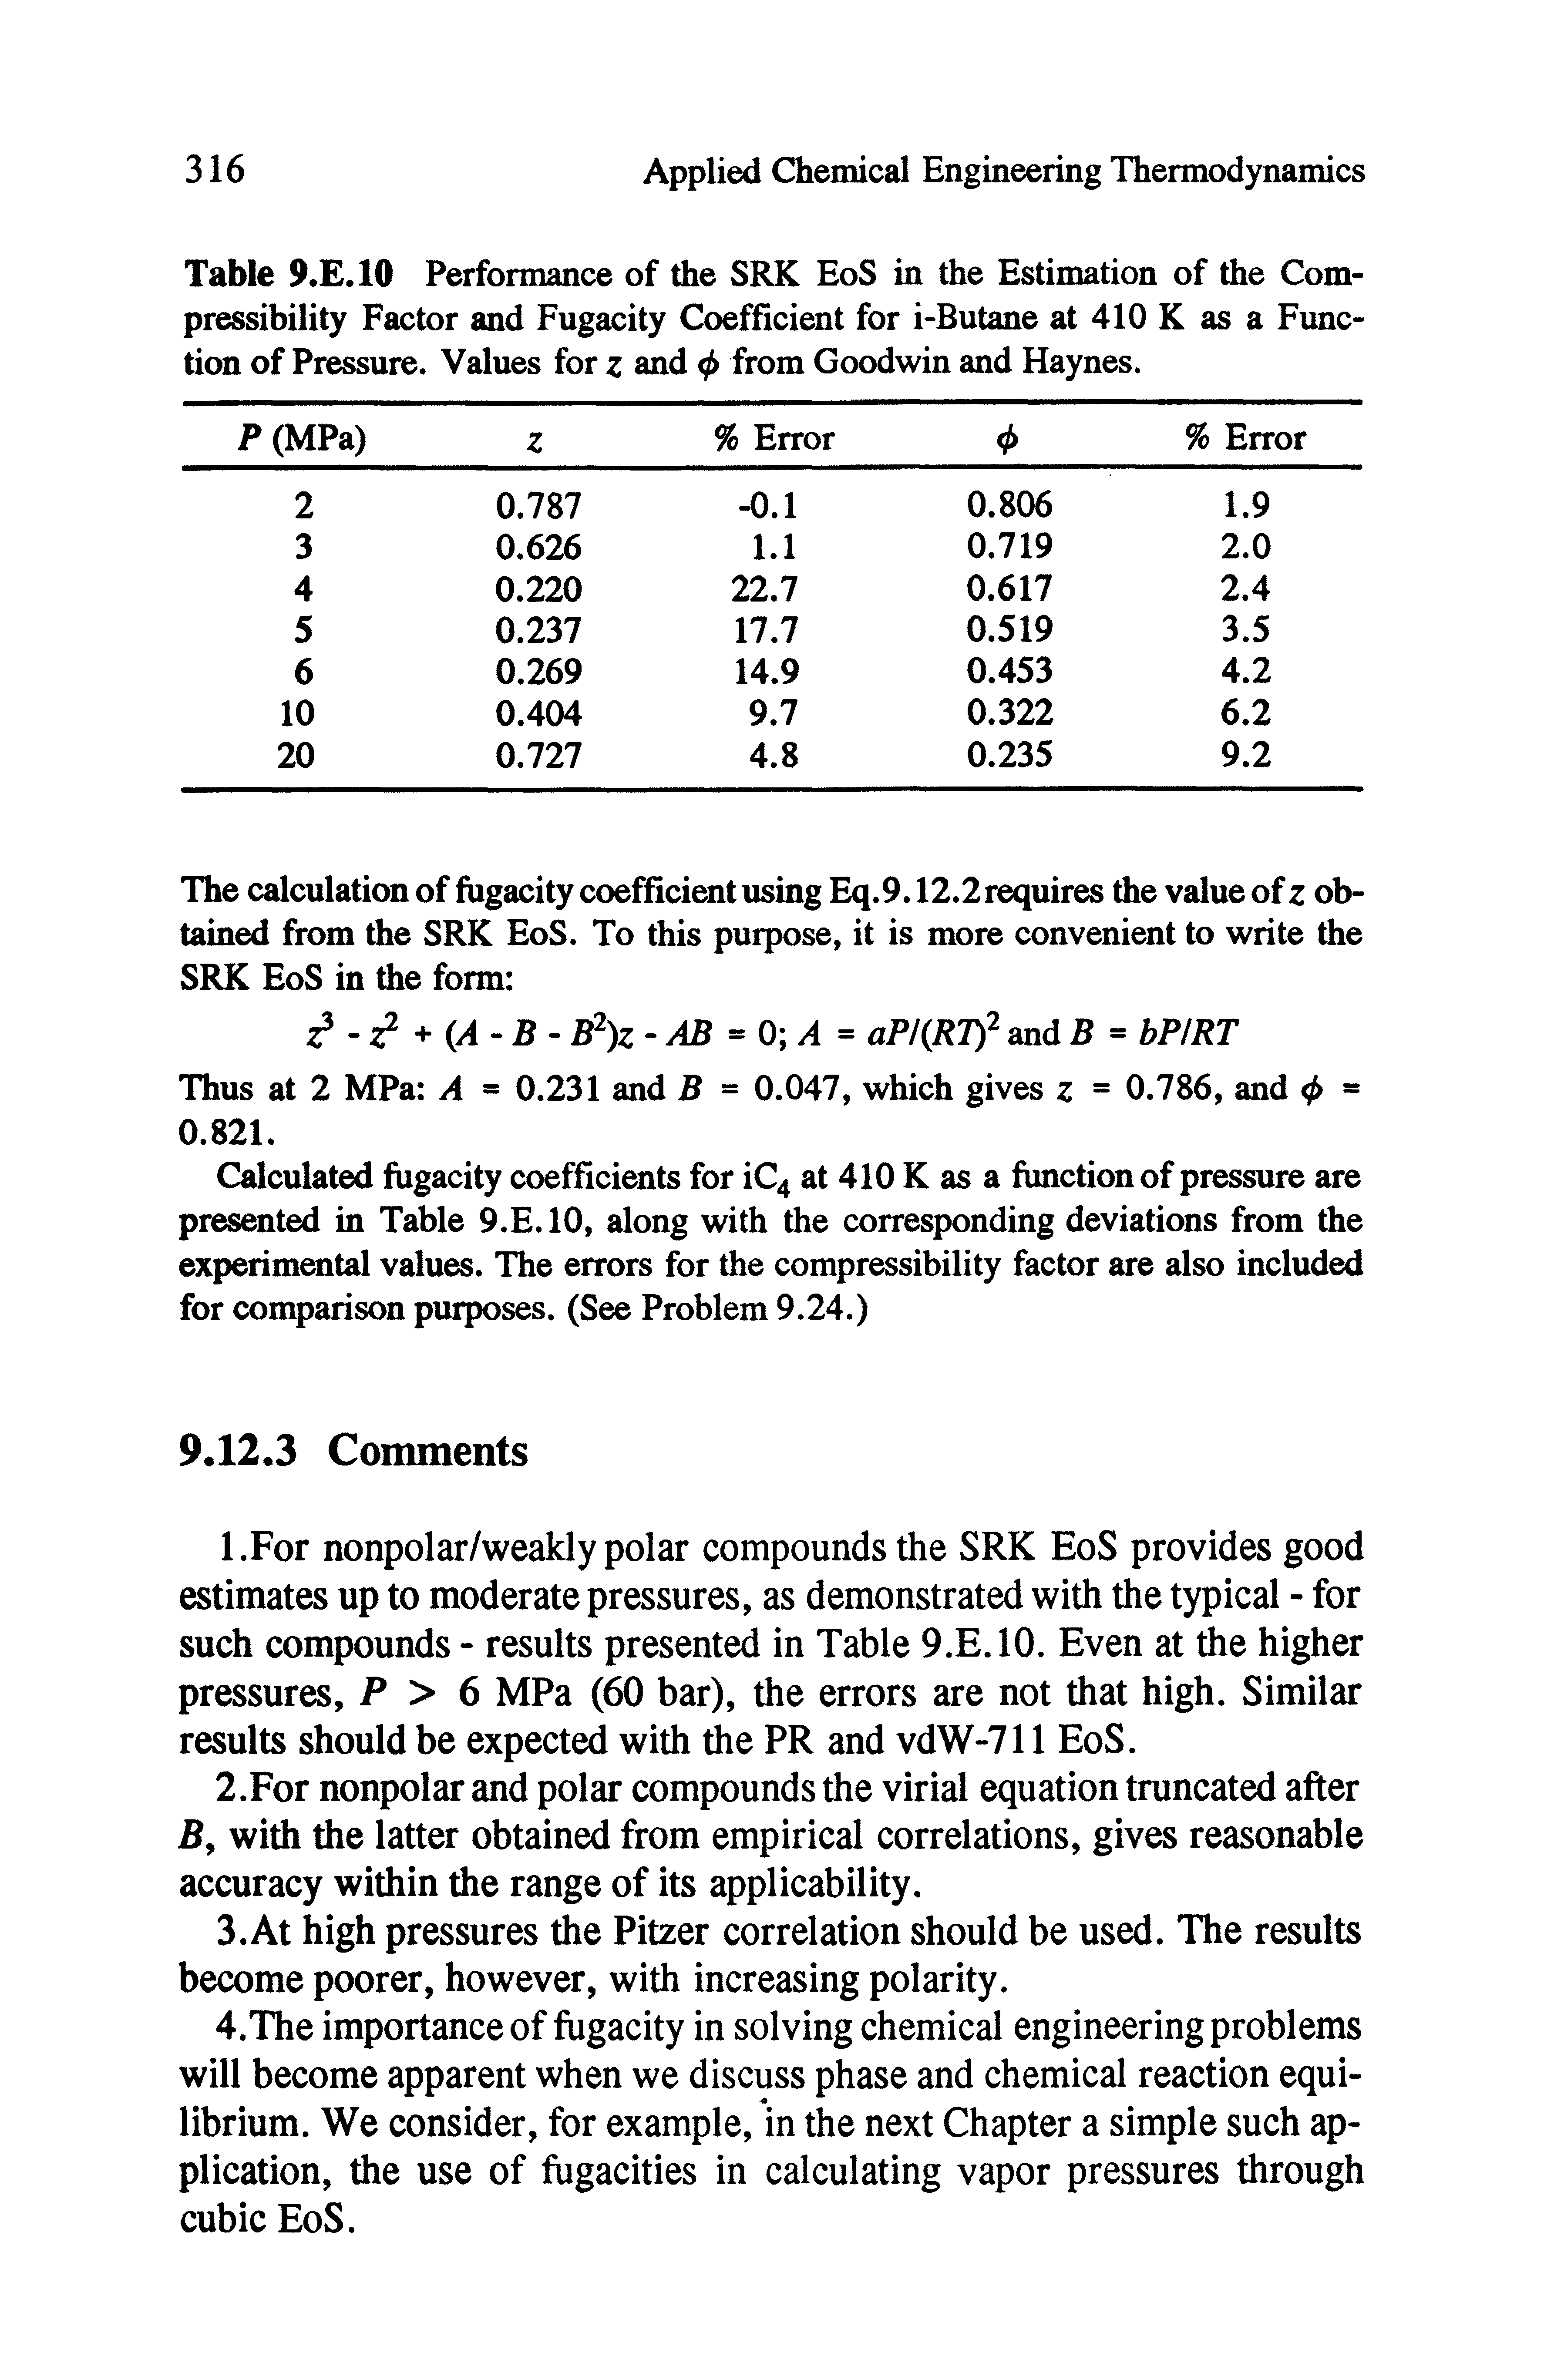 Table 9.E.10 Performance of the SRK EoS in the Estimation of the Compressibility Factor and Fugacity Coefficient for i-Butane at 410 K as a Fimc-tion of Pressure. Values for z and from Goodwin and Haynes.